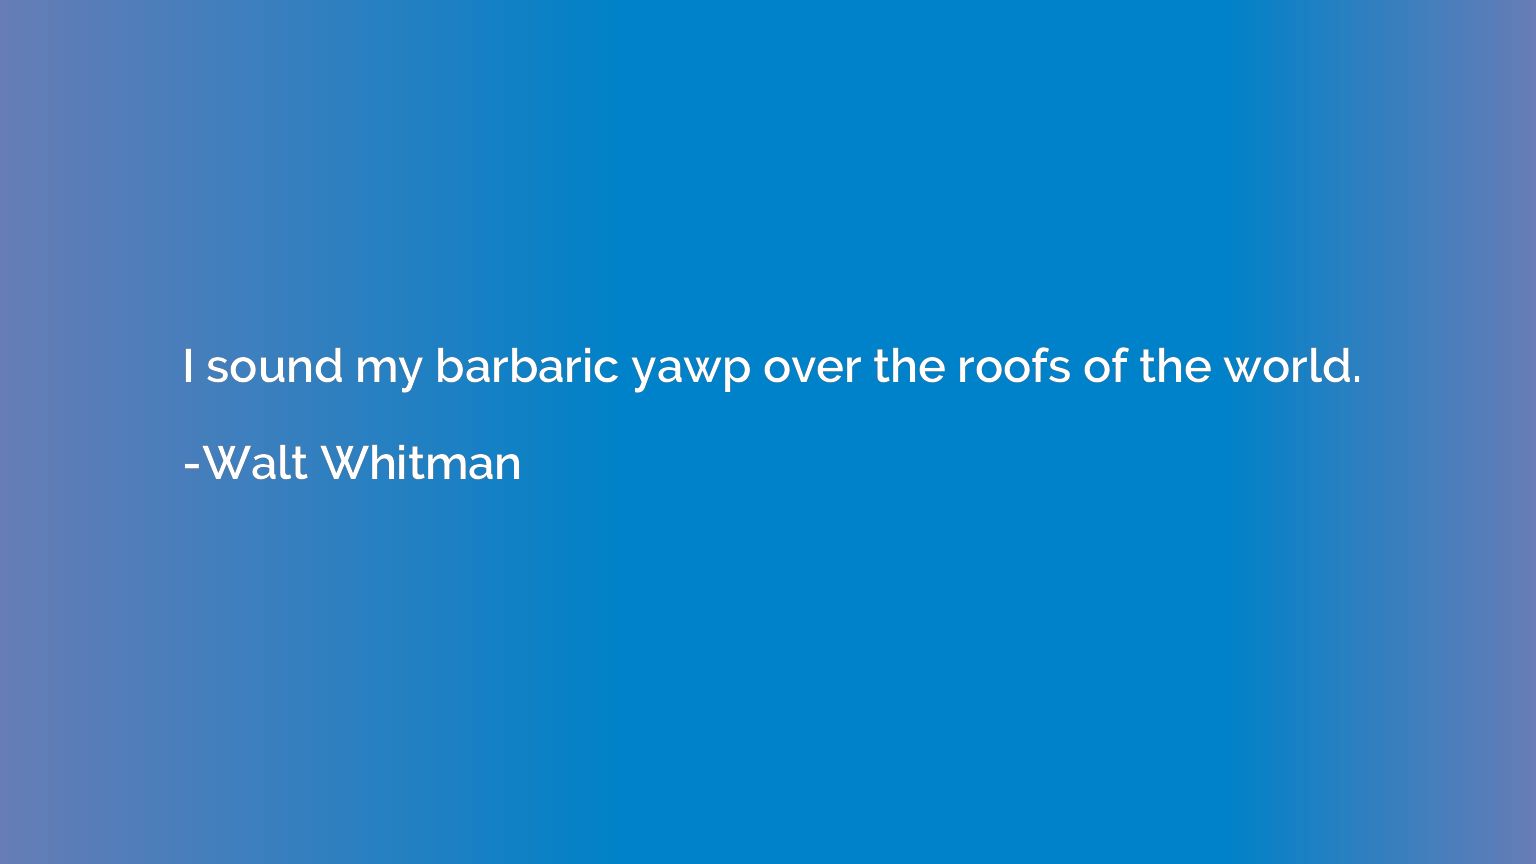 I sound my barbaric yawp over the roofs of the world.